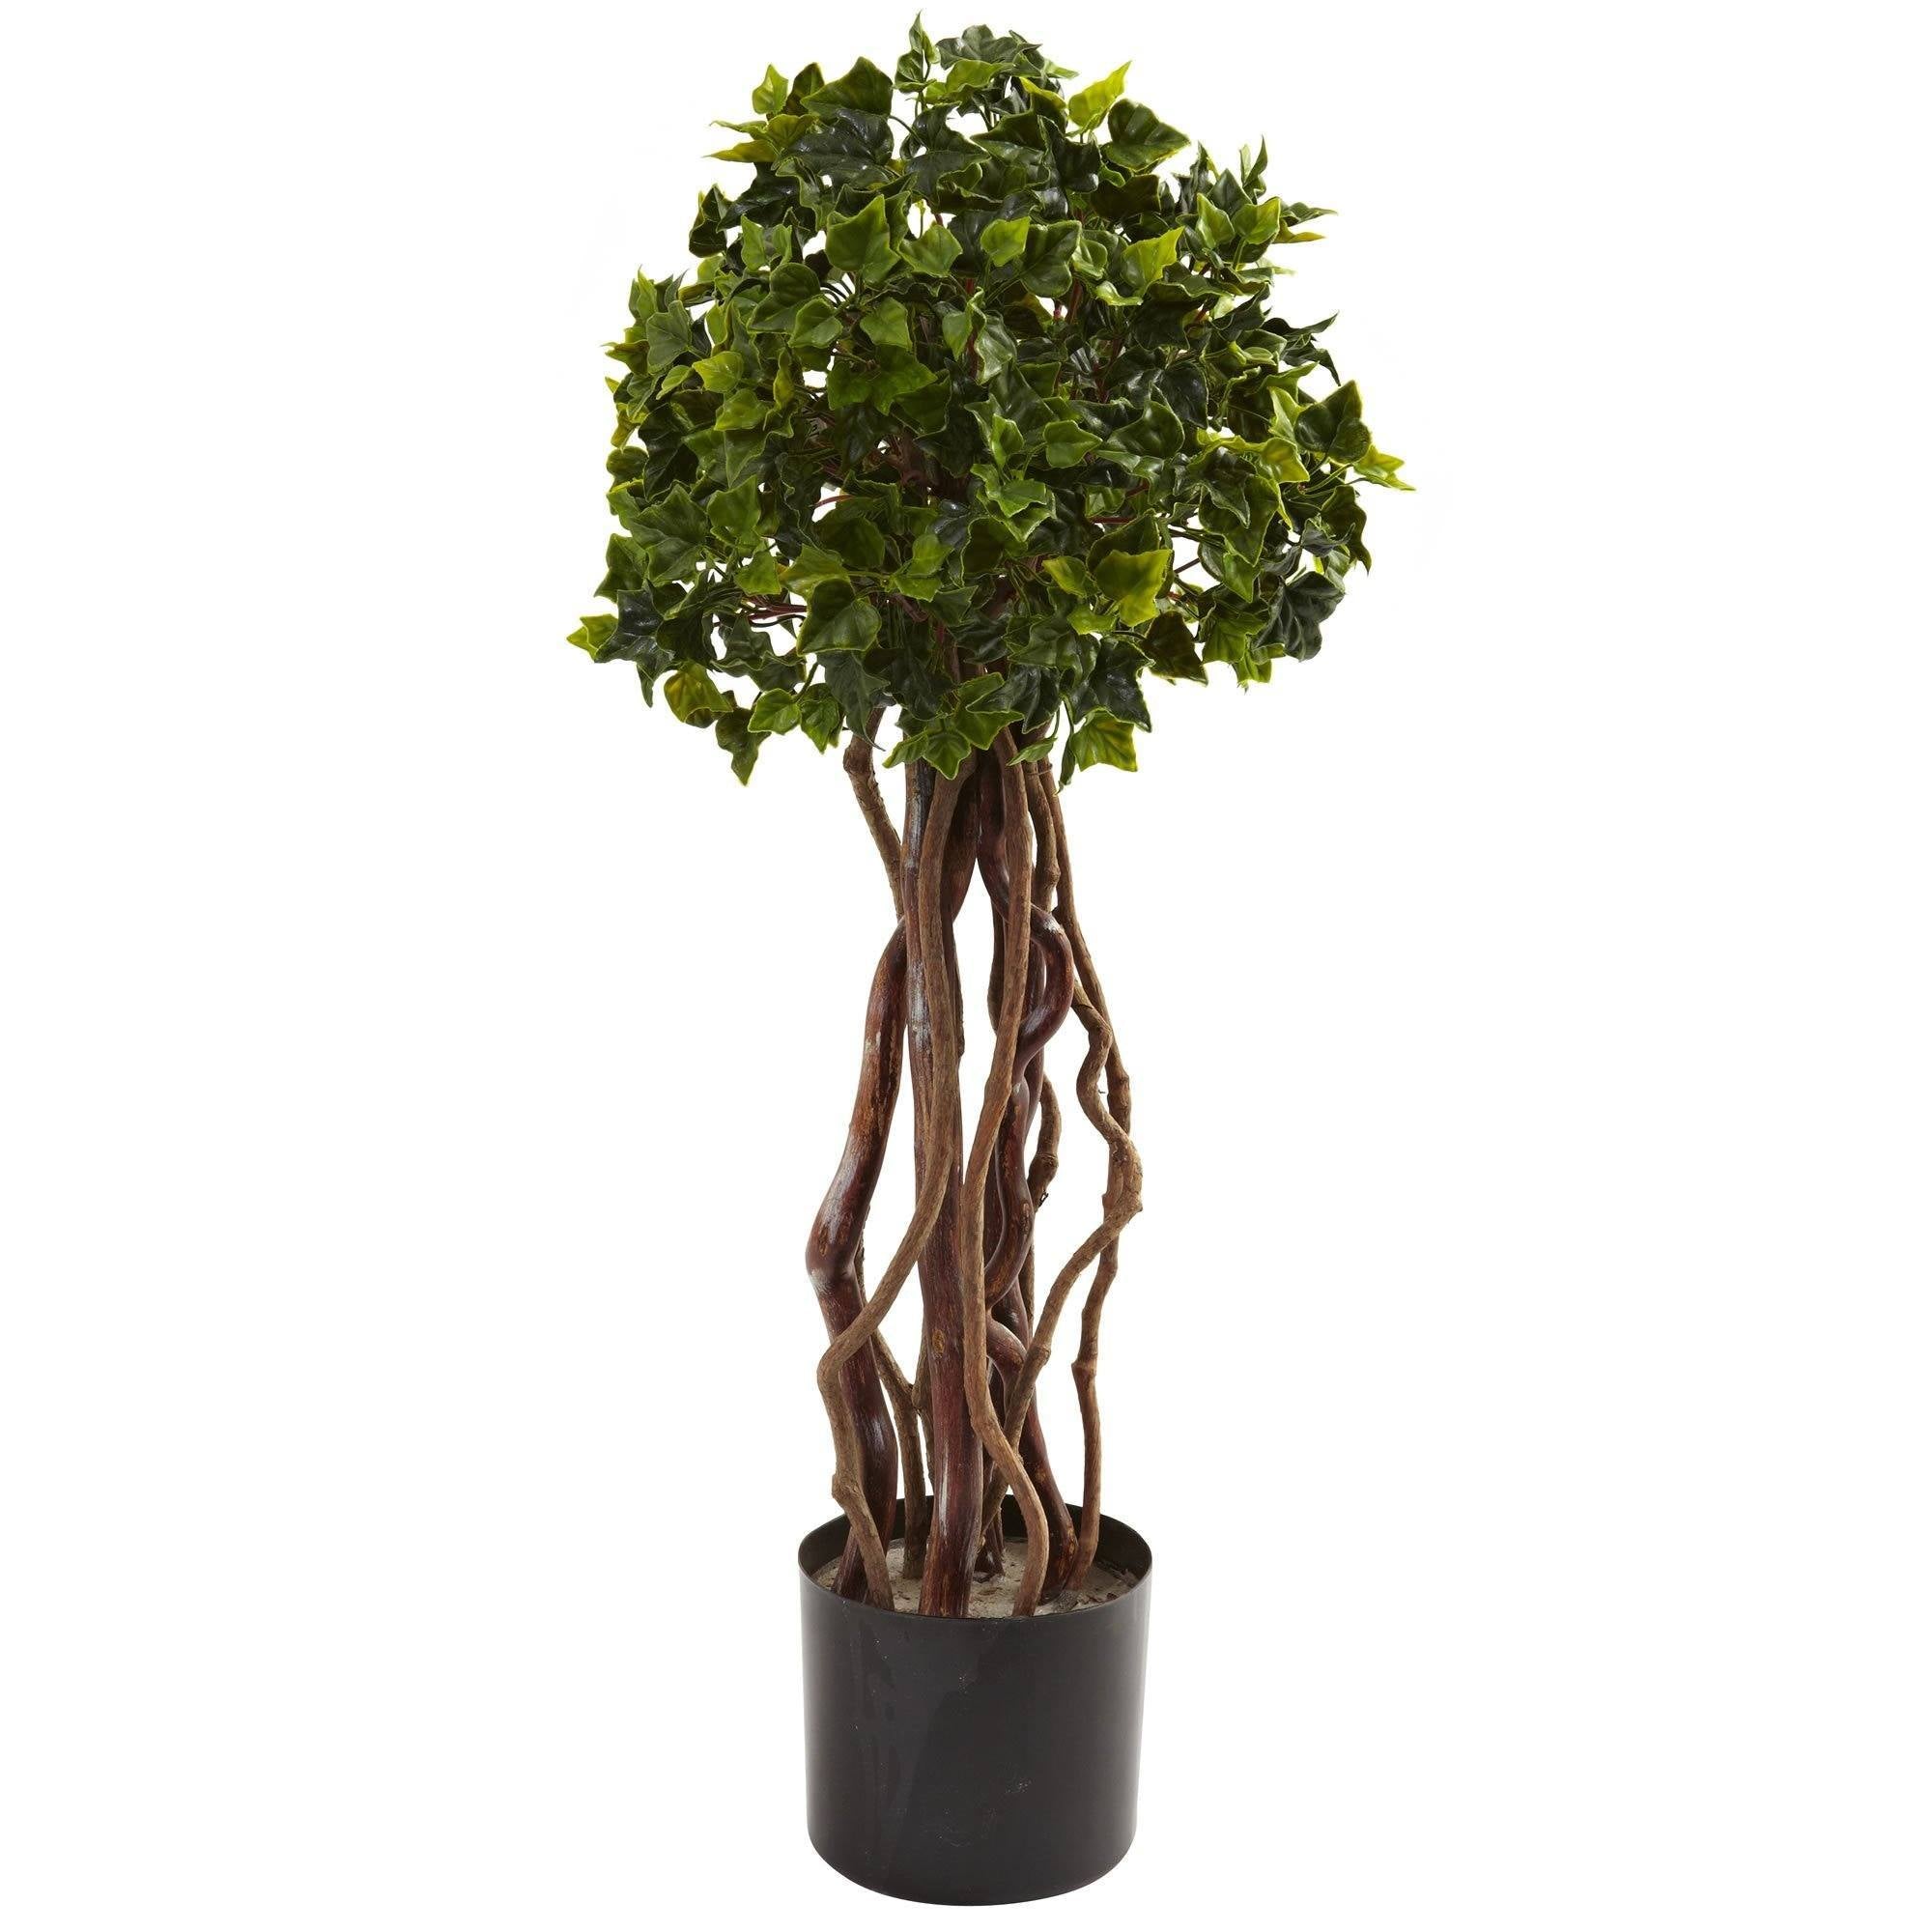 Artificial Tree - 2.5’ English Ivy Topiary (Indoor/Outdoor) by Nearly Natural